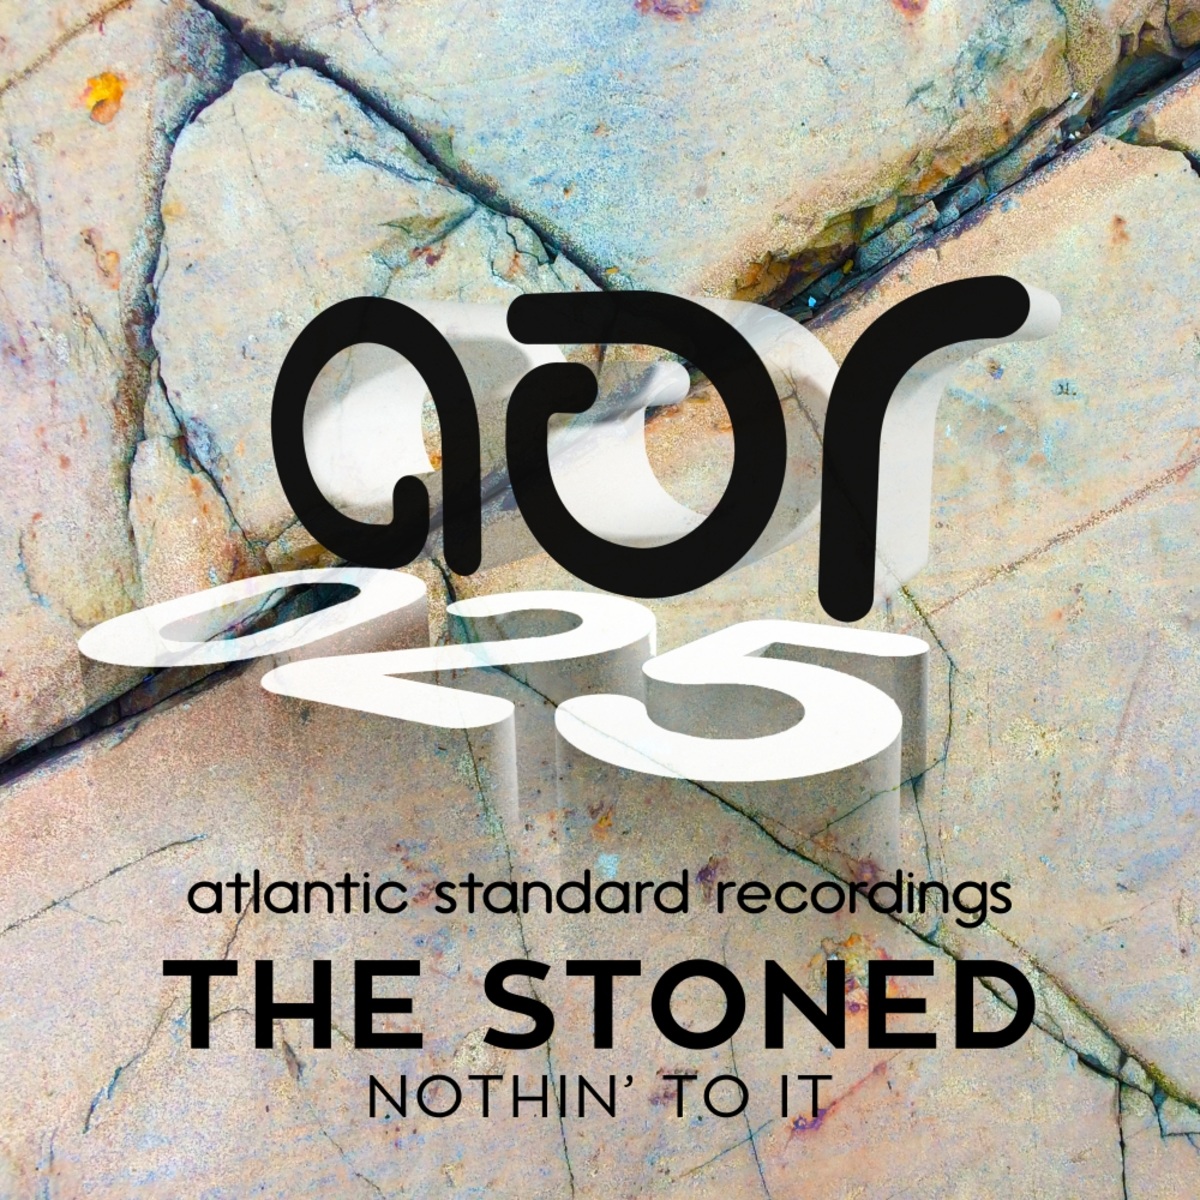 The Stoned - Nothin To It / Atlantic Standard Recordings Inc.